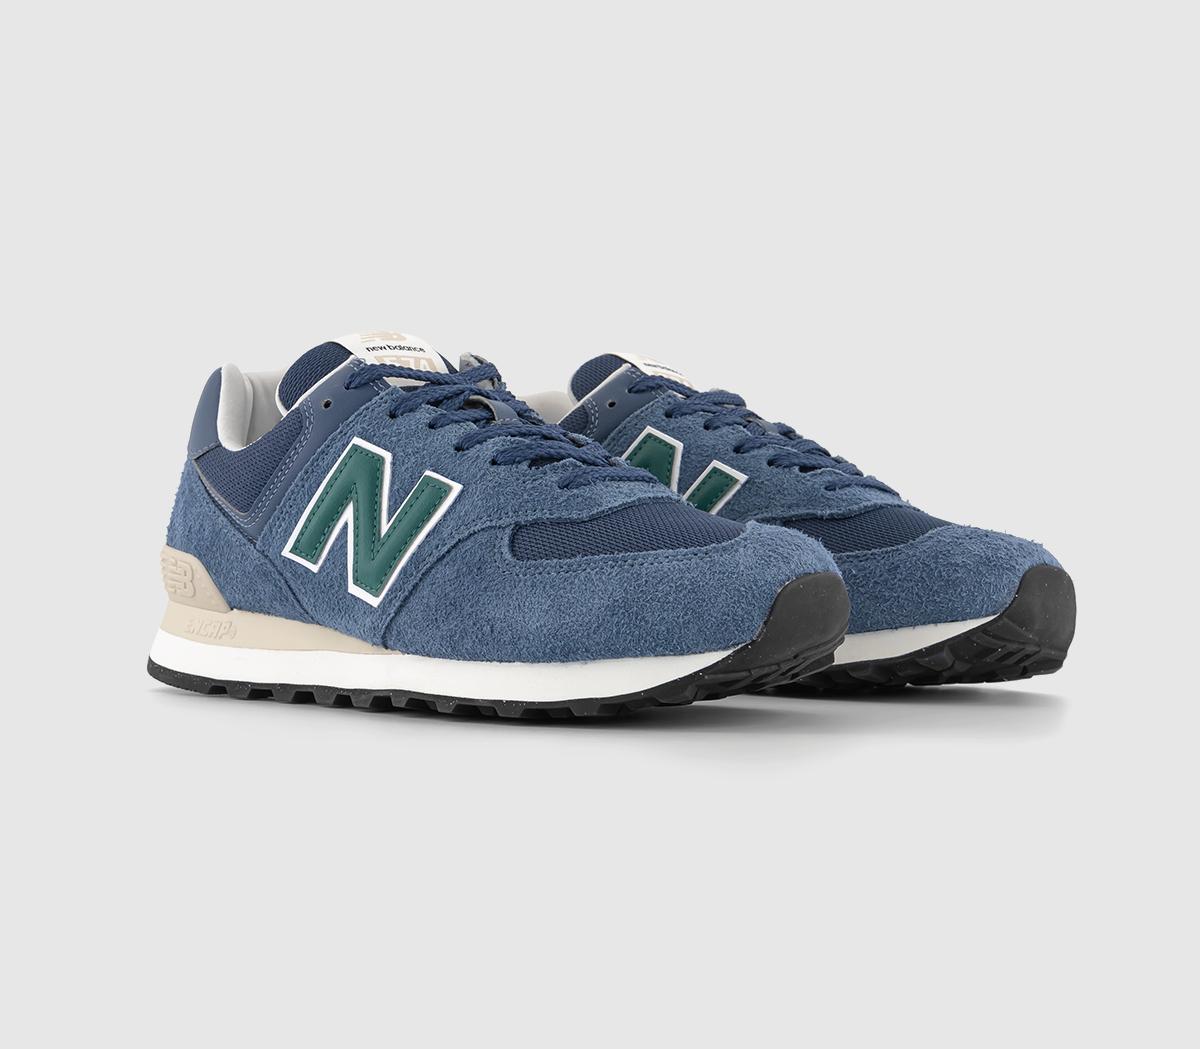 New Balance 574 Trainers Blue Navy Green, 8.5